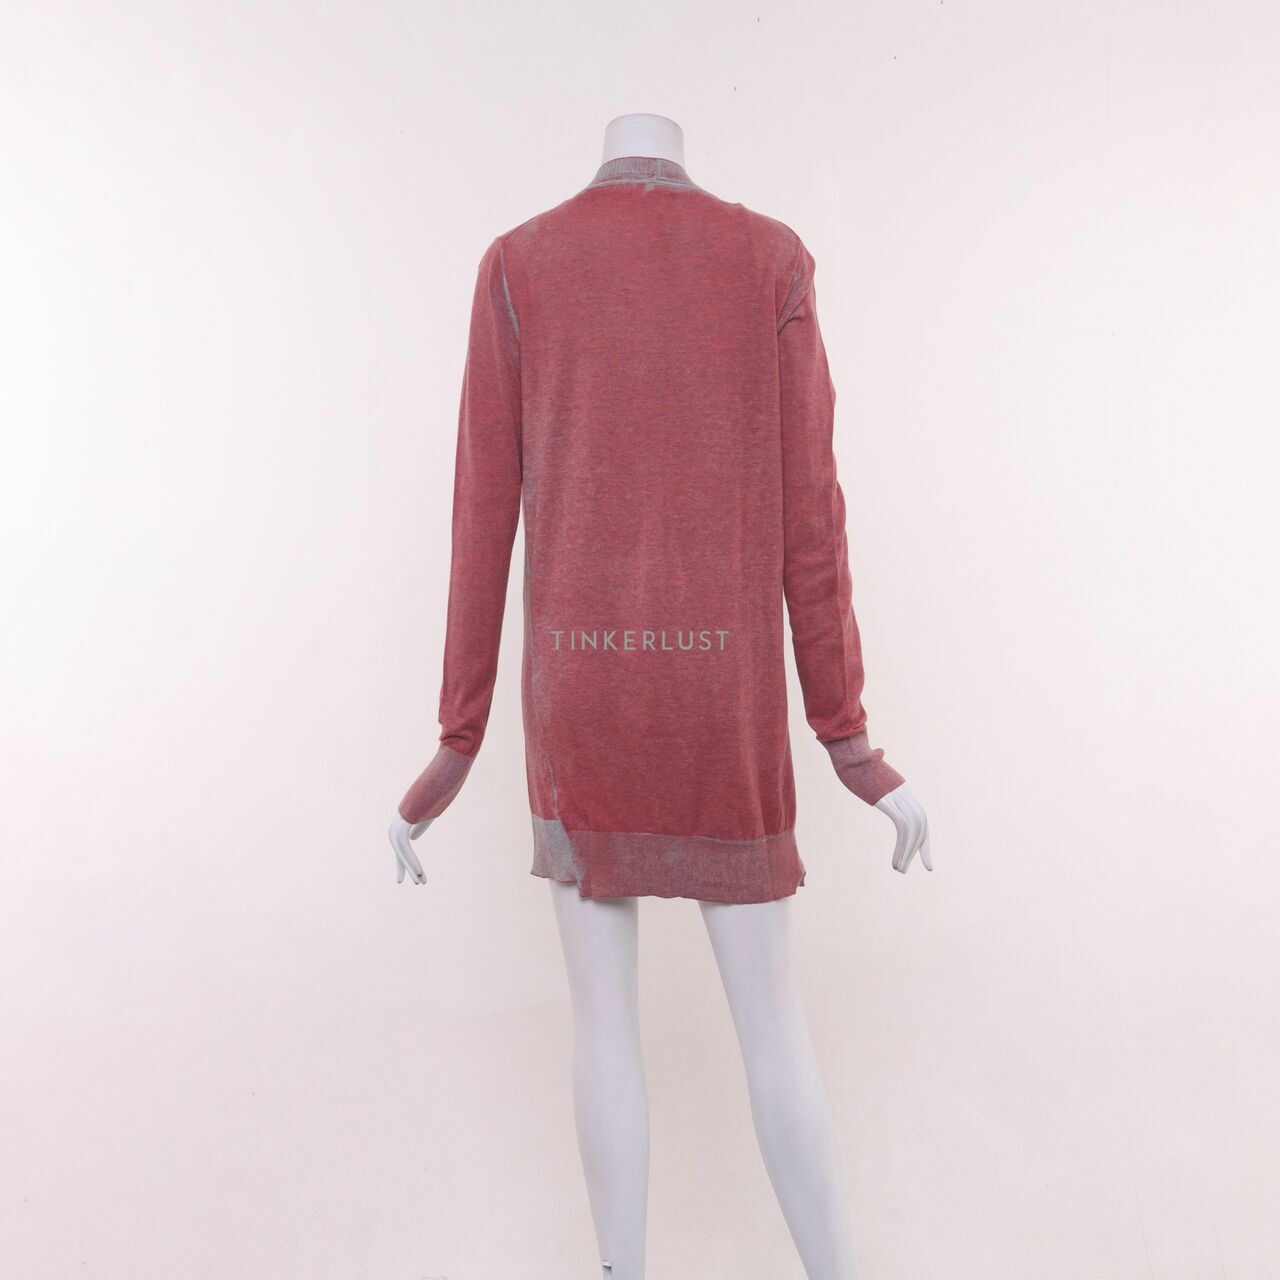 DKNY Jeans Red Cardigan